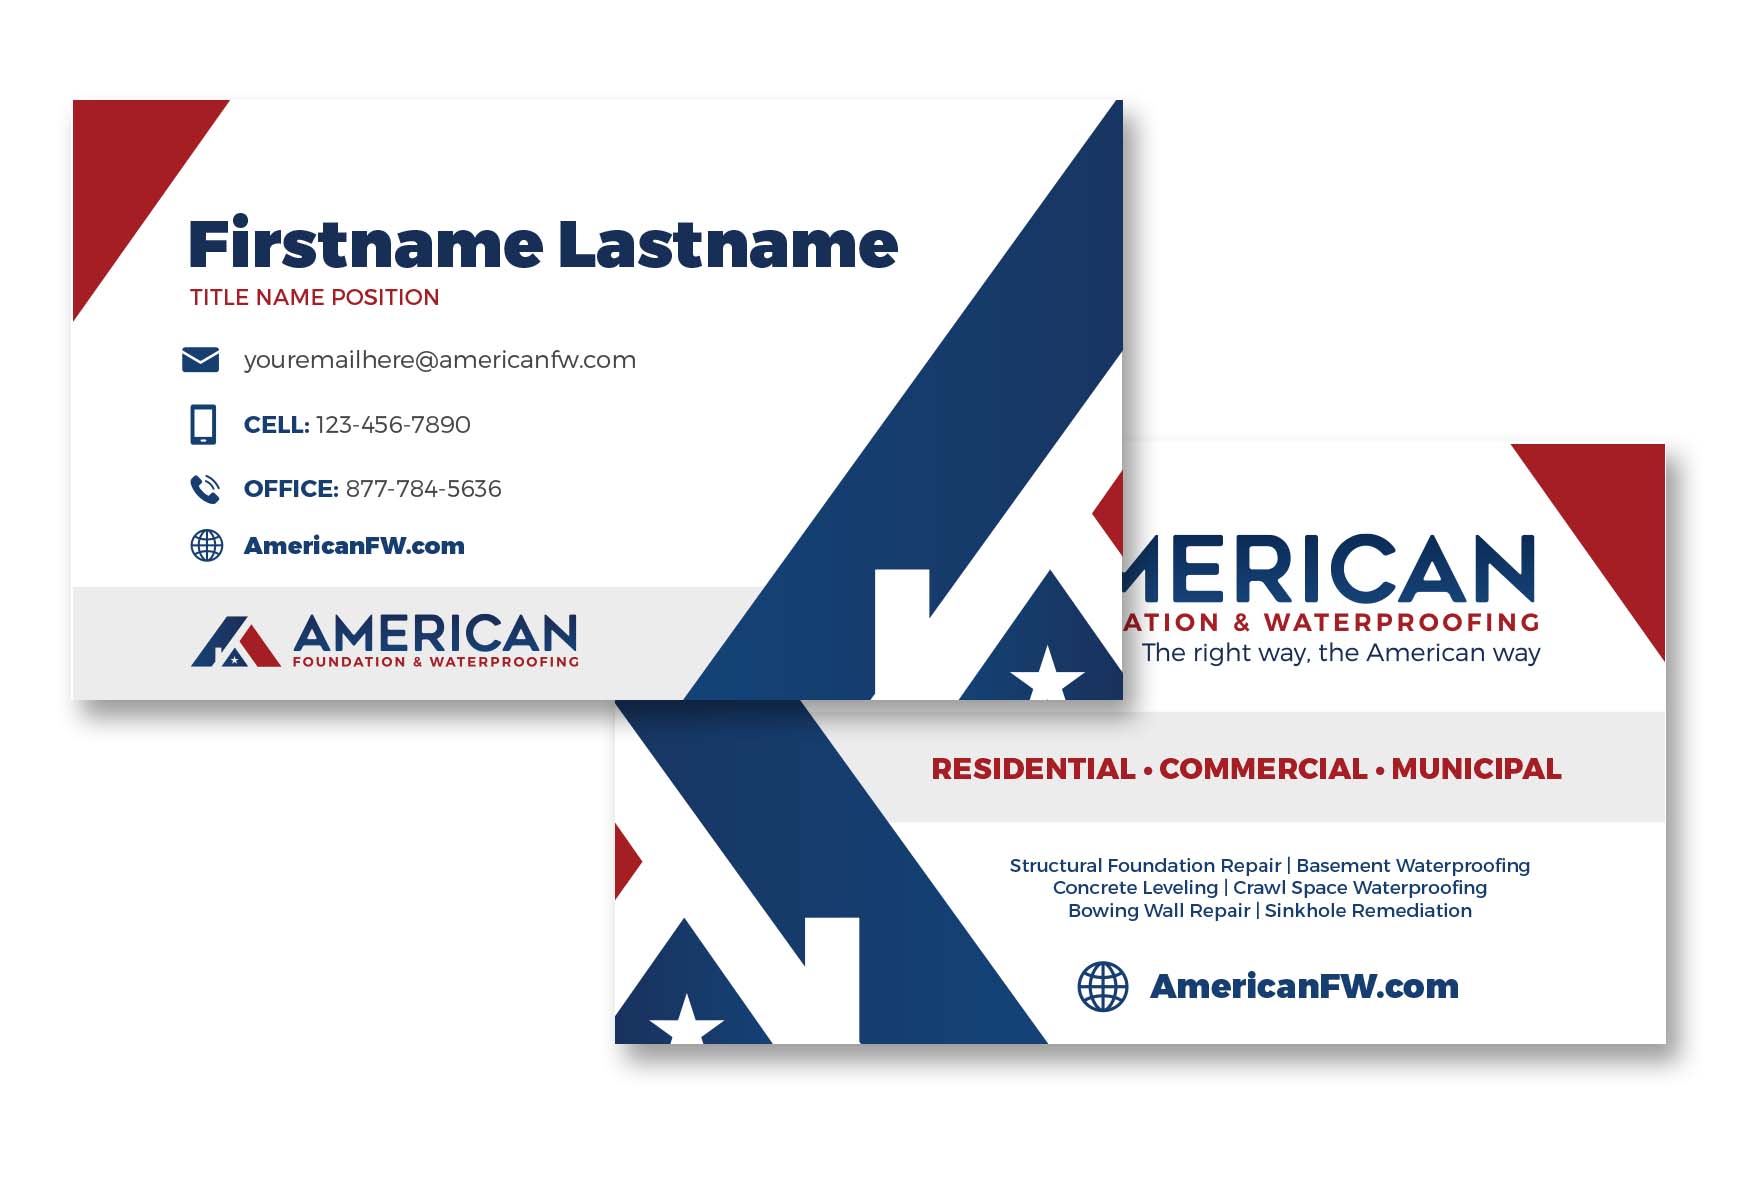 American Foundation & Waterproofing Business Cards